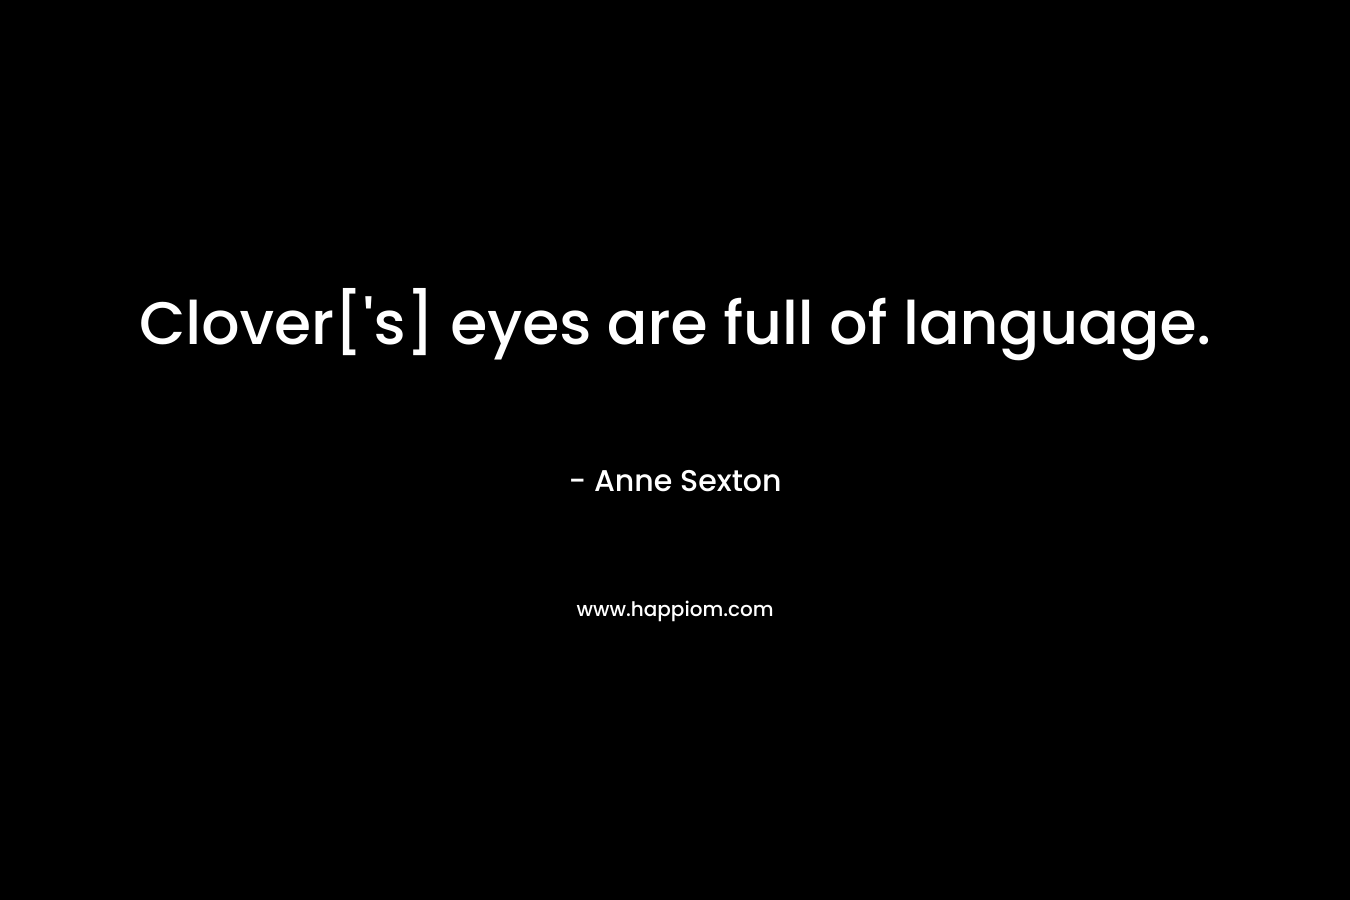 Clover[‘s] eyes are full of language. – Anne Sexton